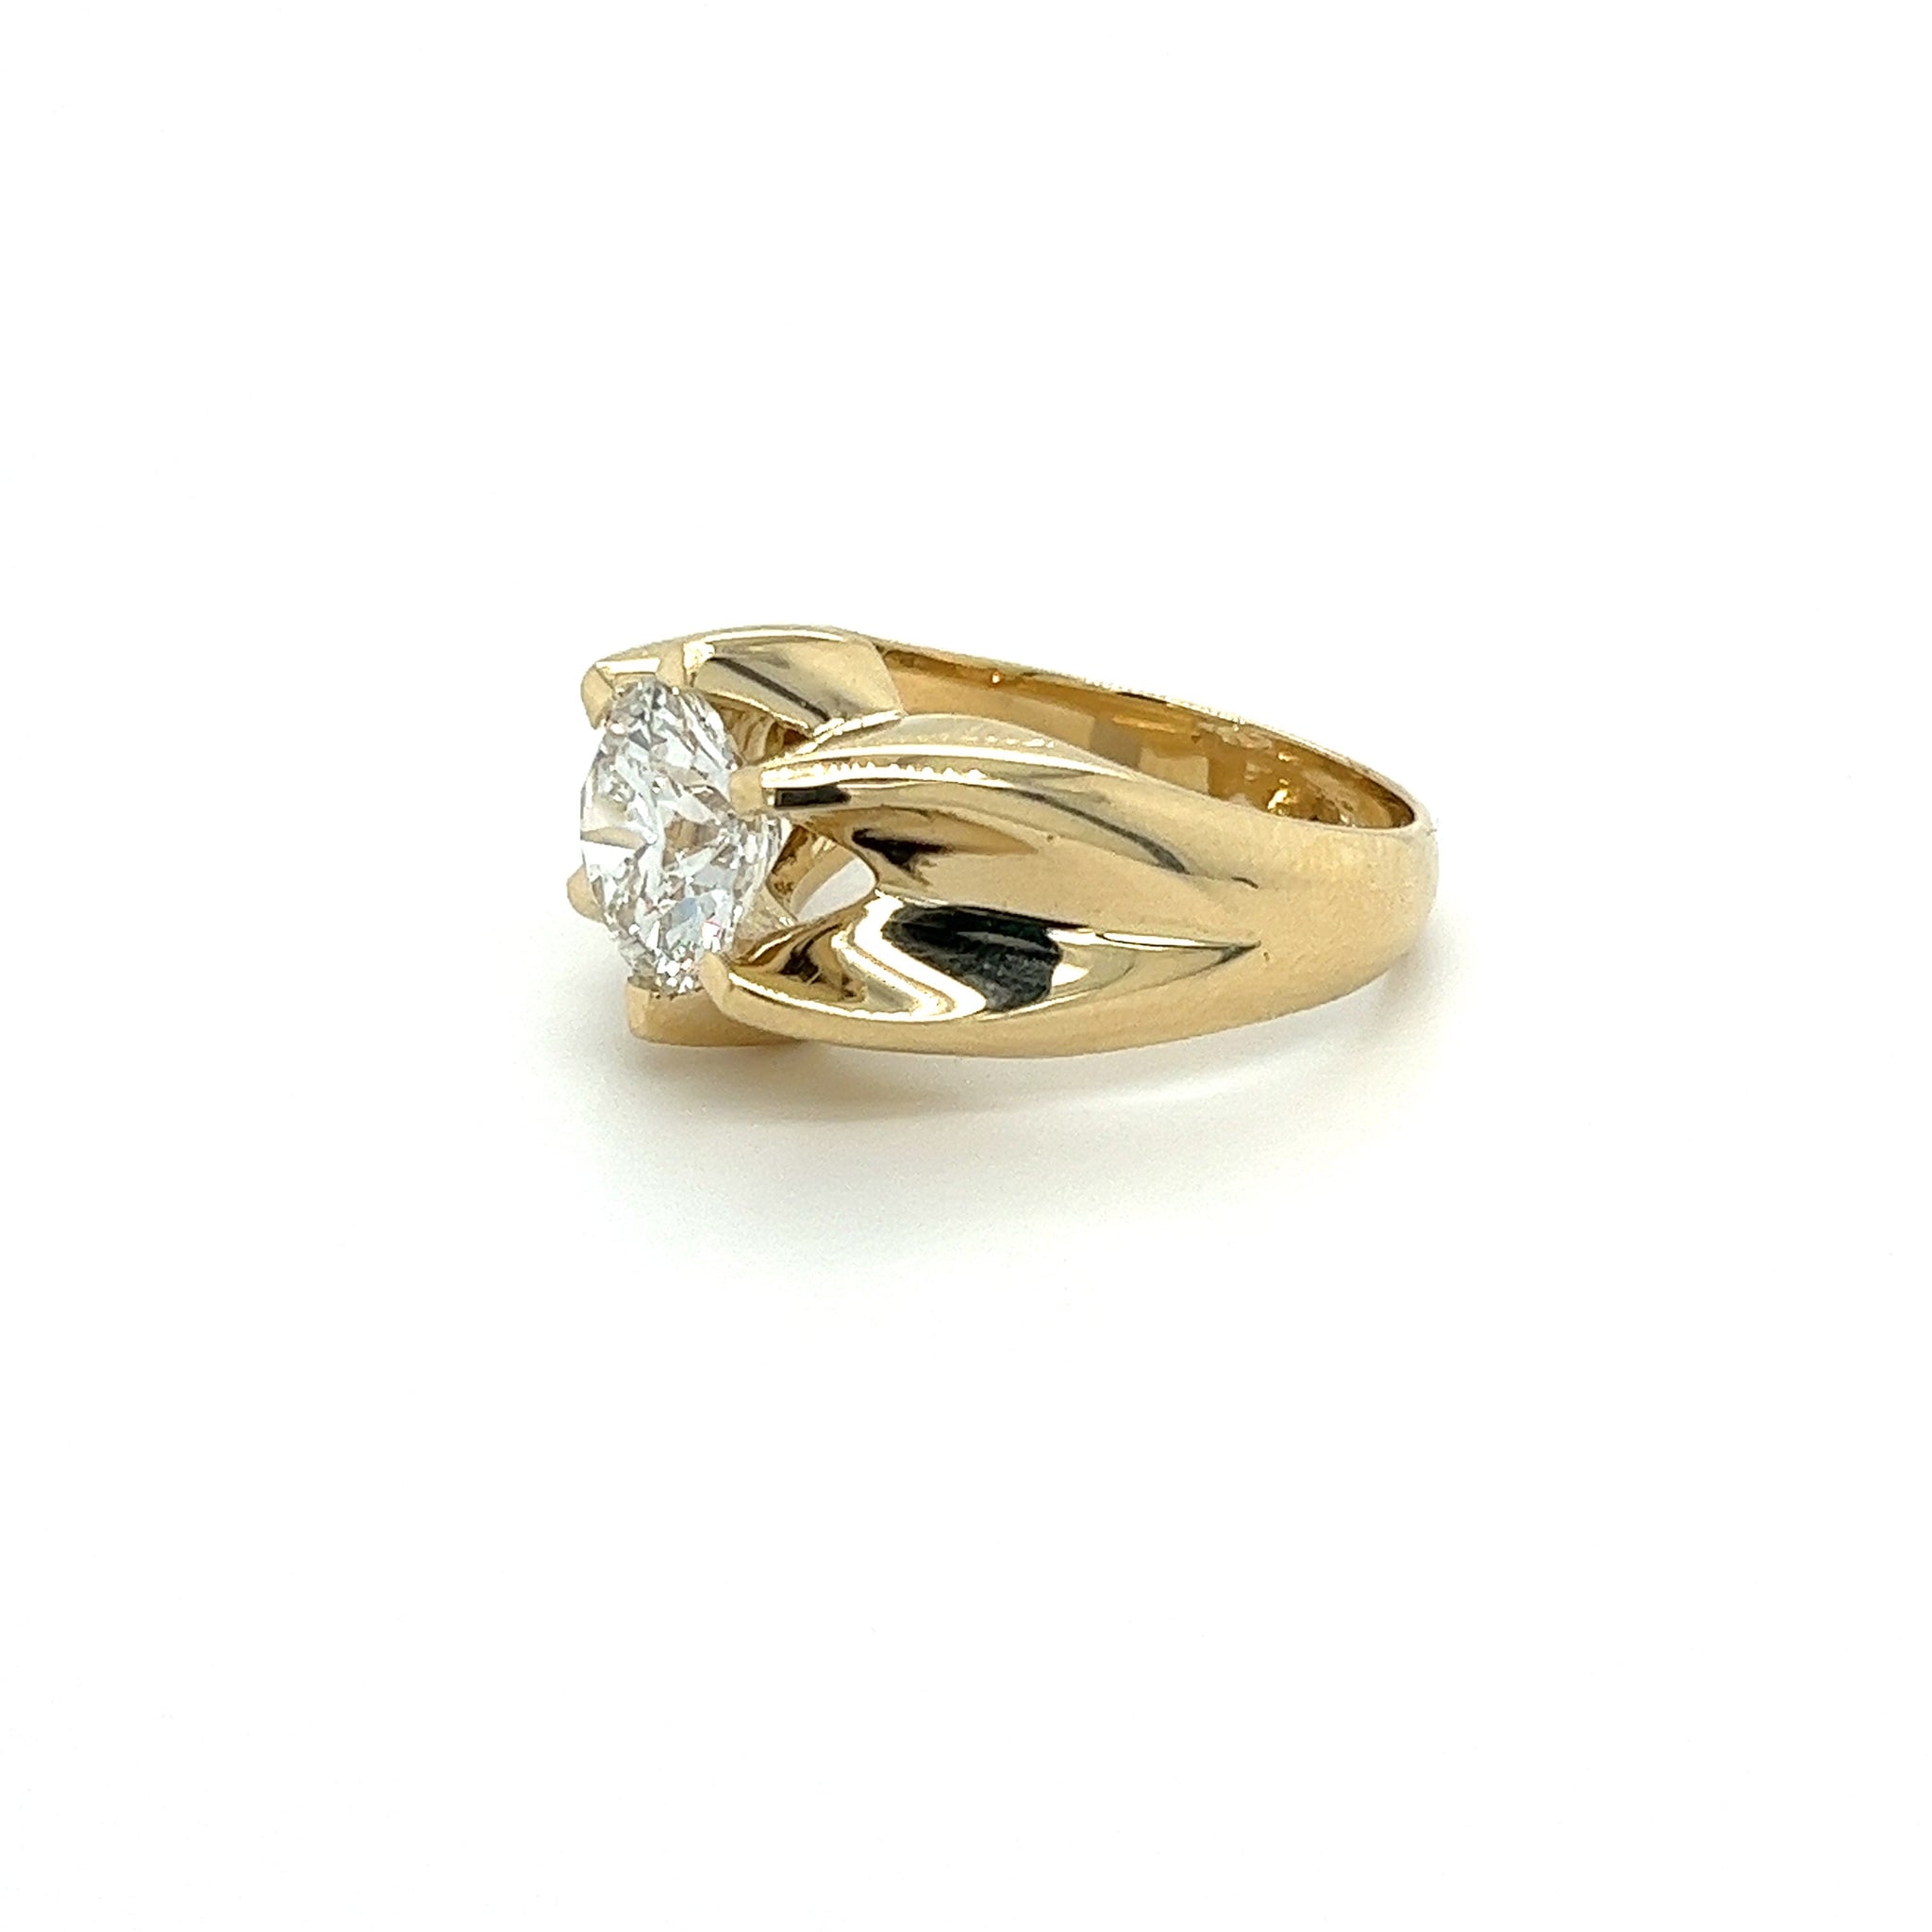 3.5 Carat Round Cut Lab Grown Diamond Mens Solitaire Ring in 14K Yellow Gold